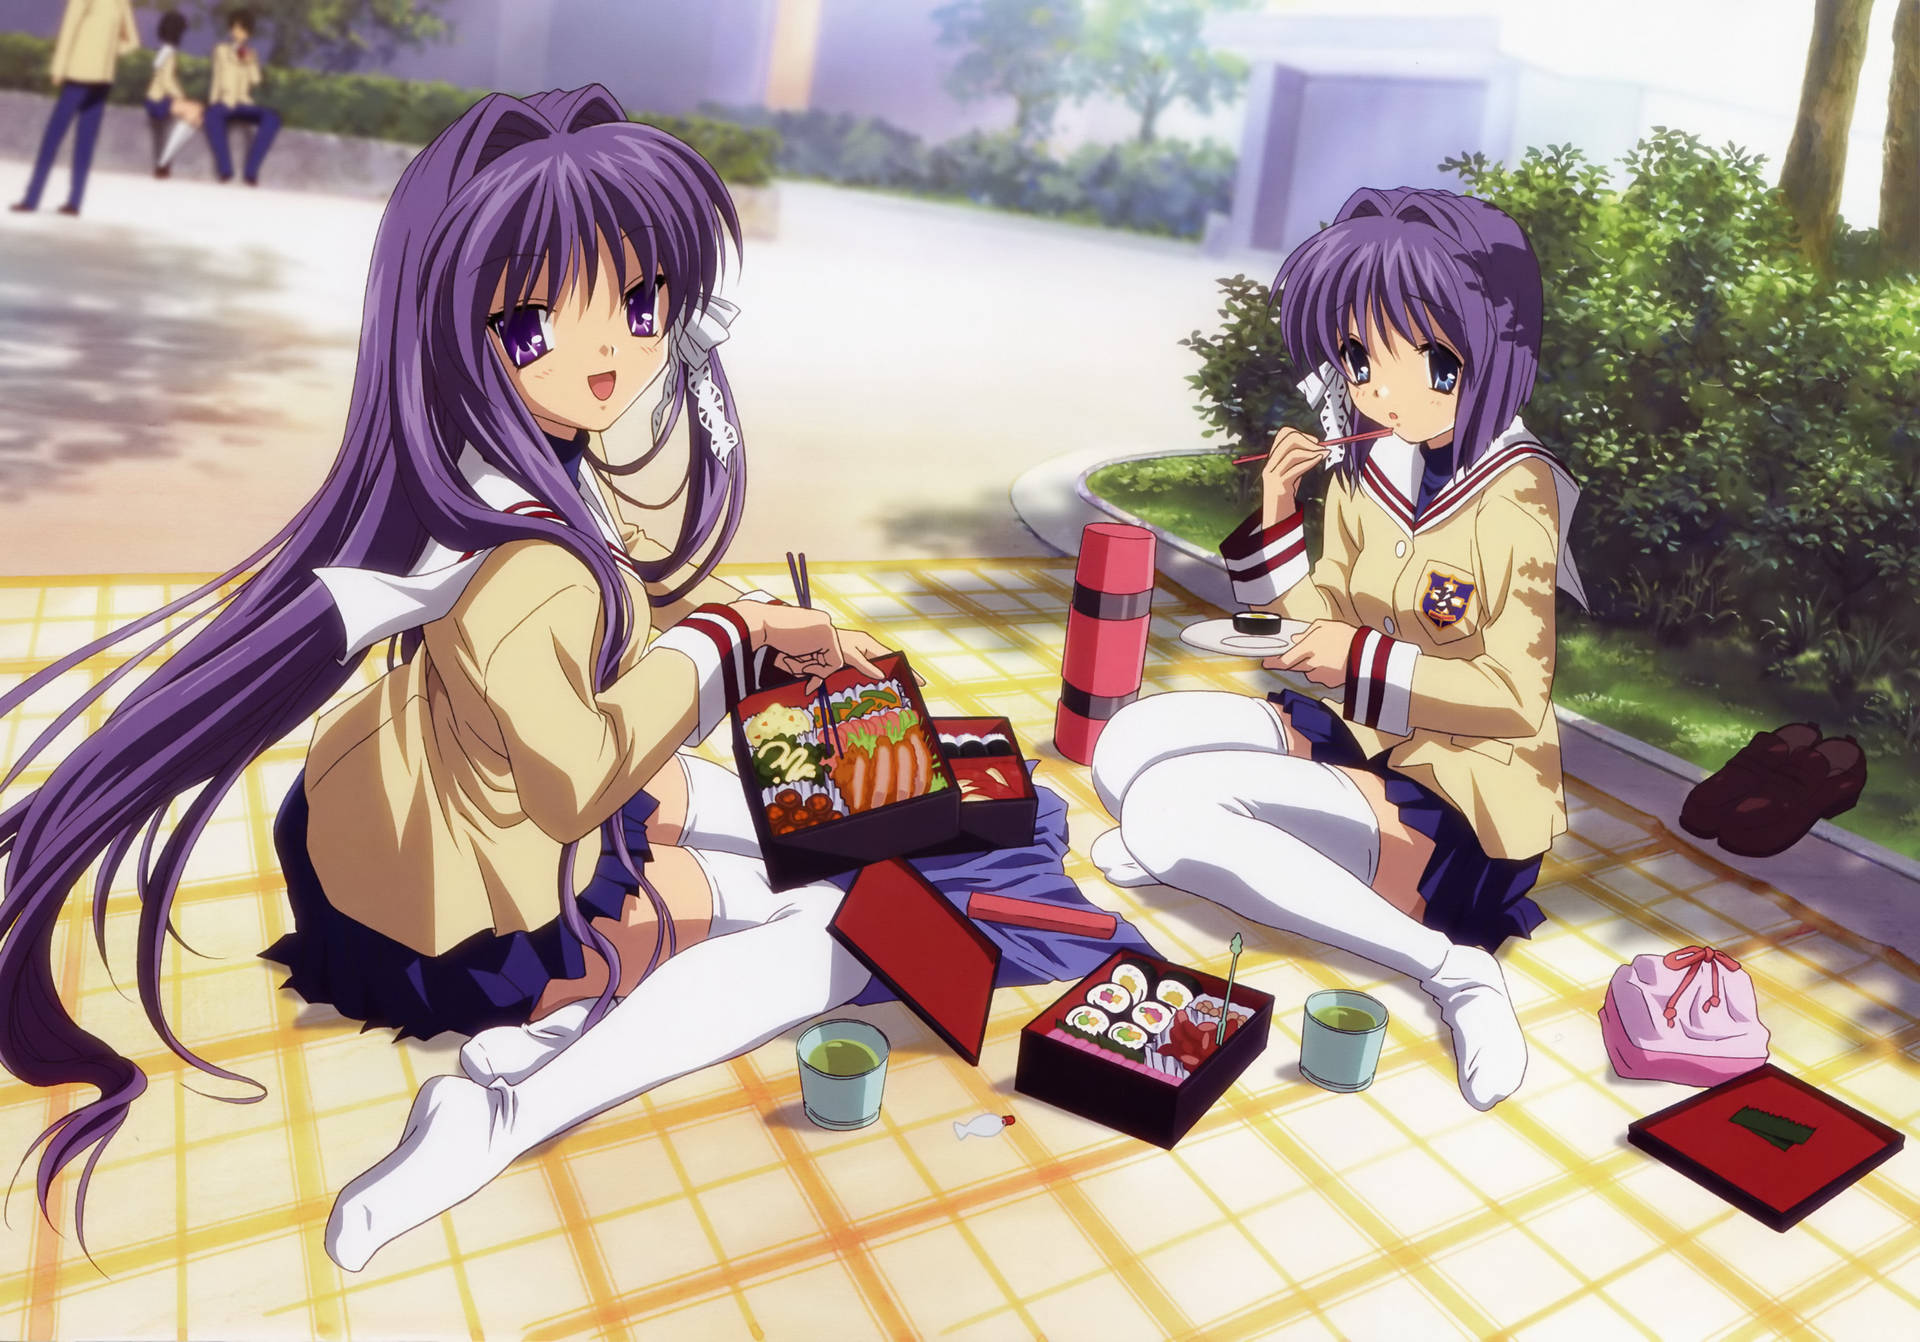 Kyou And Ryou Clannad